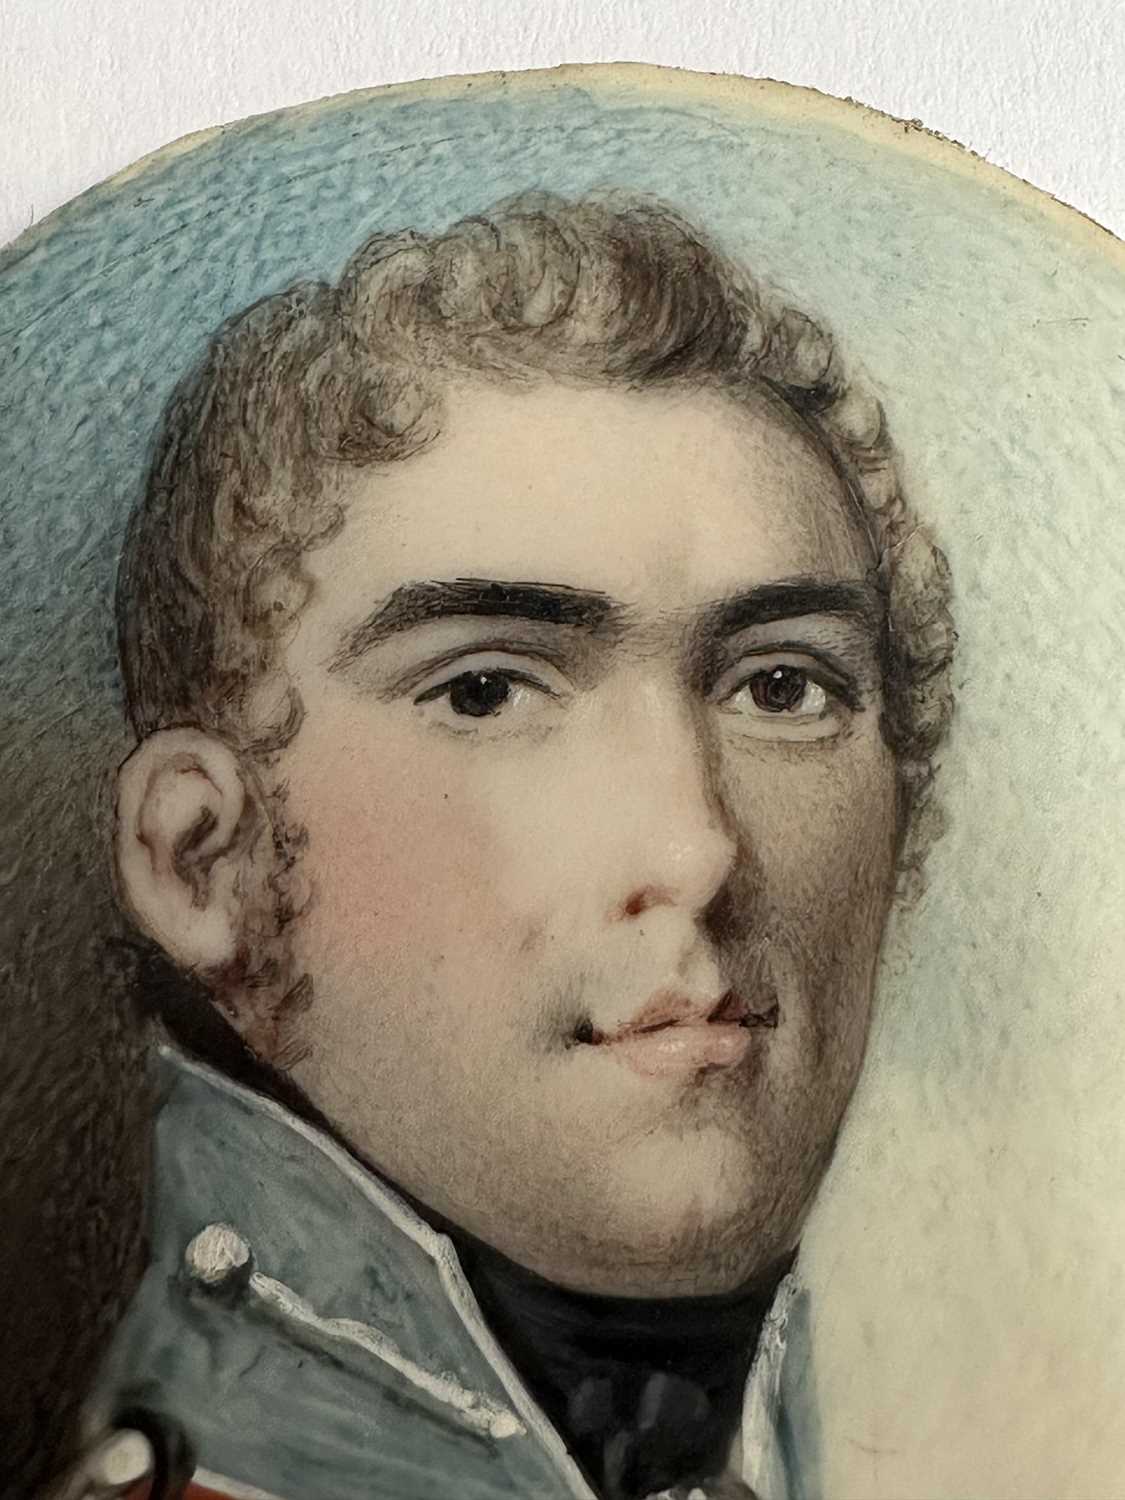 Nicholas Freese (active 1794-1814) portrait miniature on ivory - Portrait of an Office - Image 13 of 16